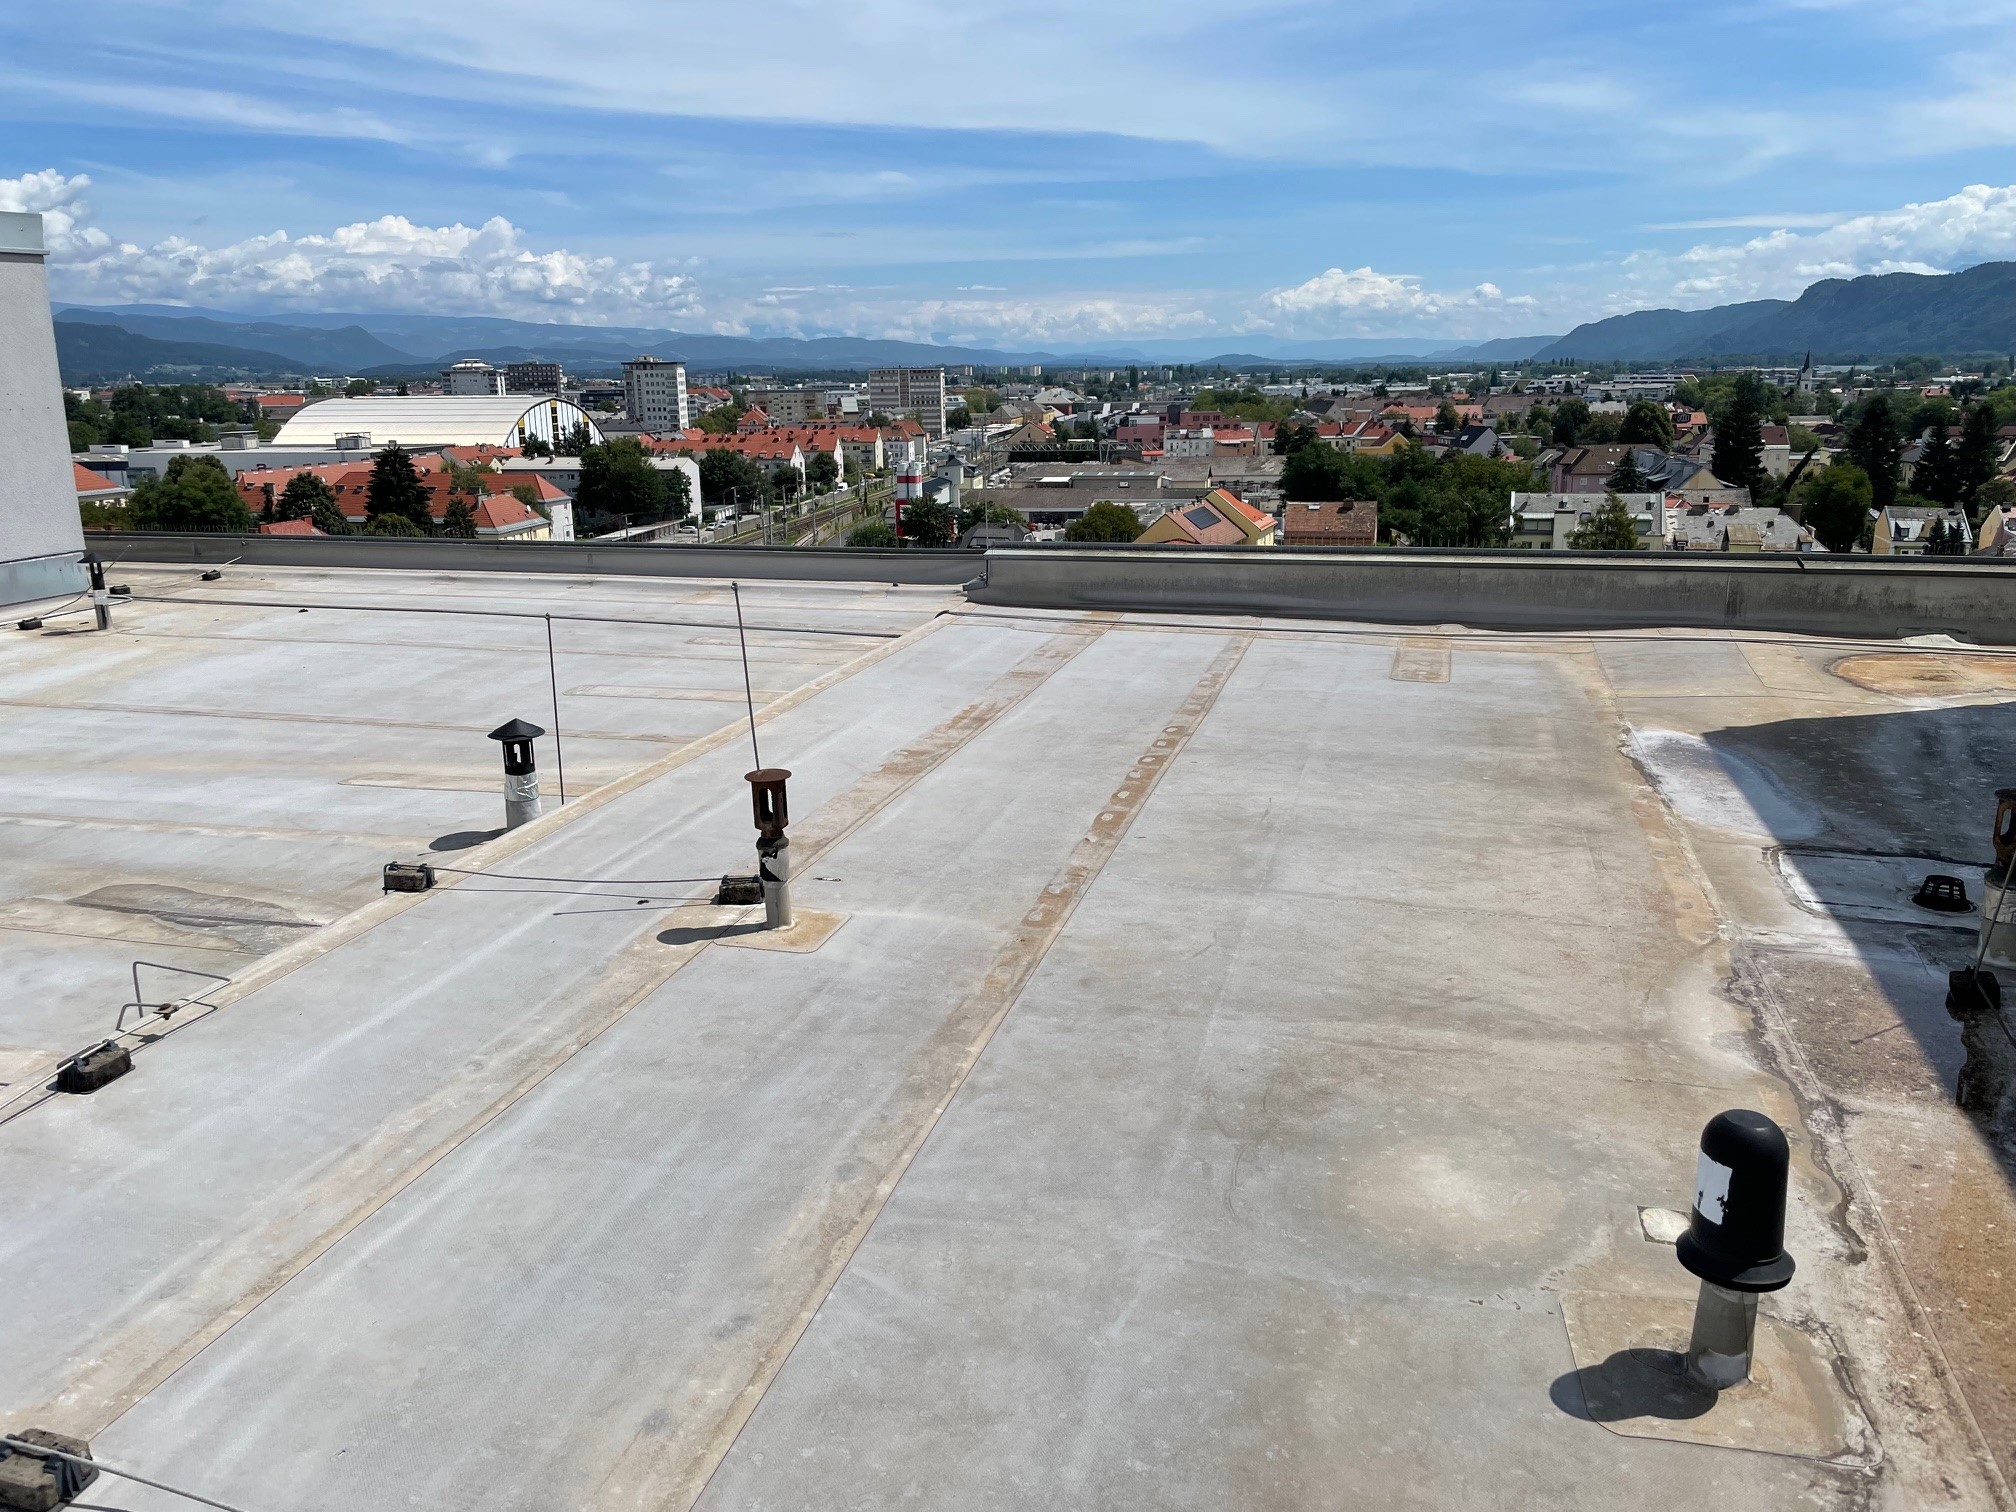 Flat roof renovation: focus on quality and durability